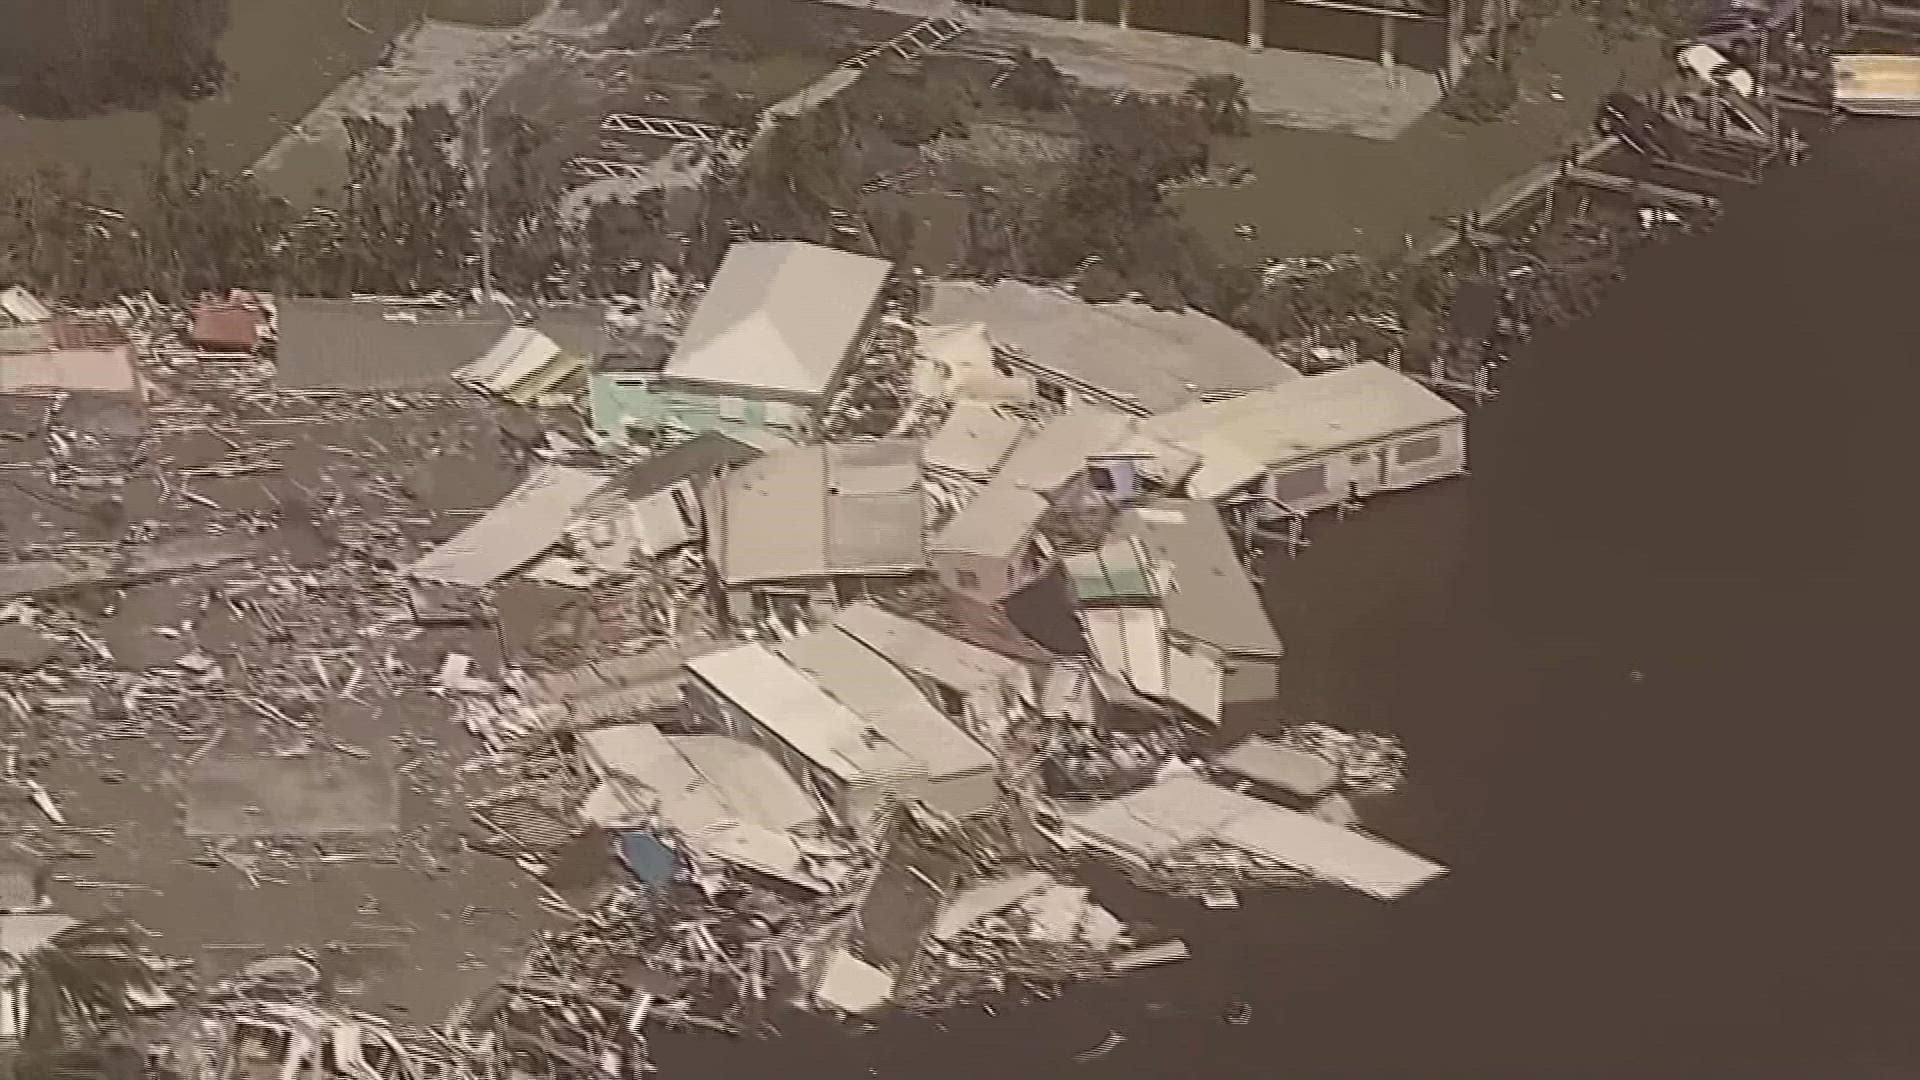 Gov. Ron DeSantis said first responders have been providing relief in some of Florida's most battered areas, including Fort Myers and Sanibel.